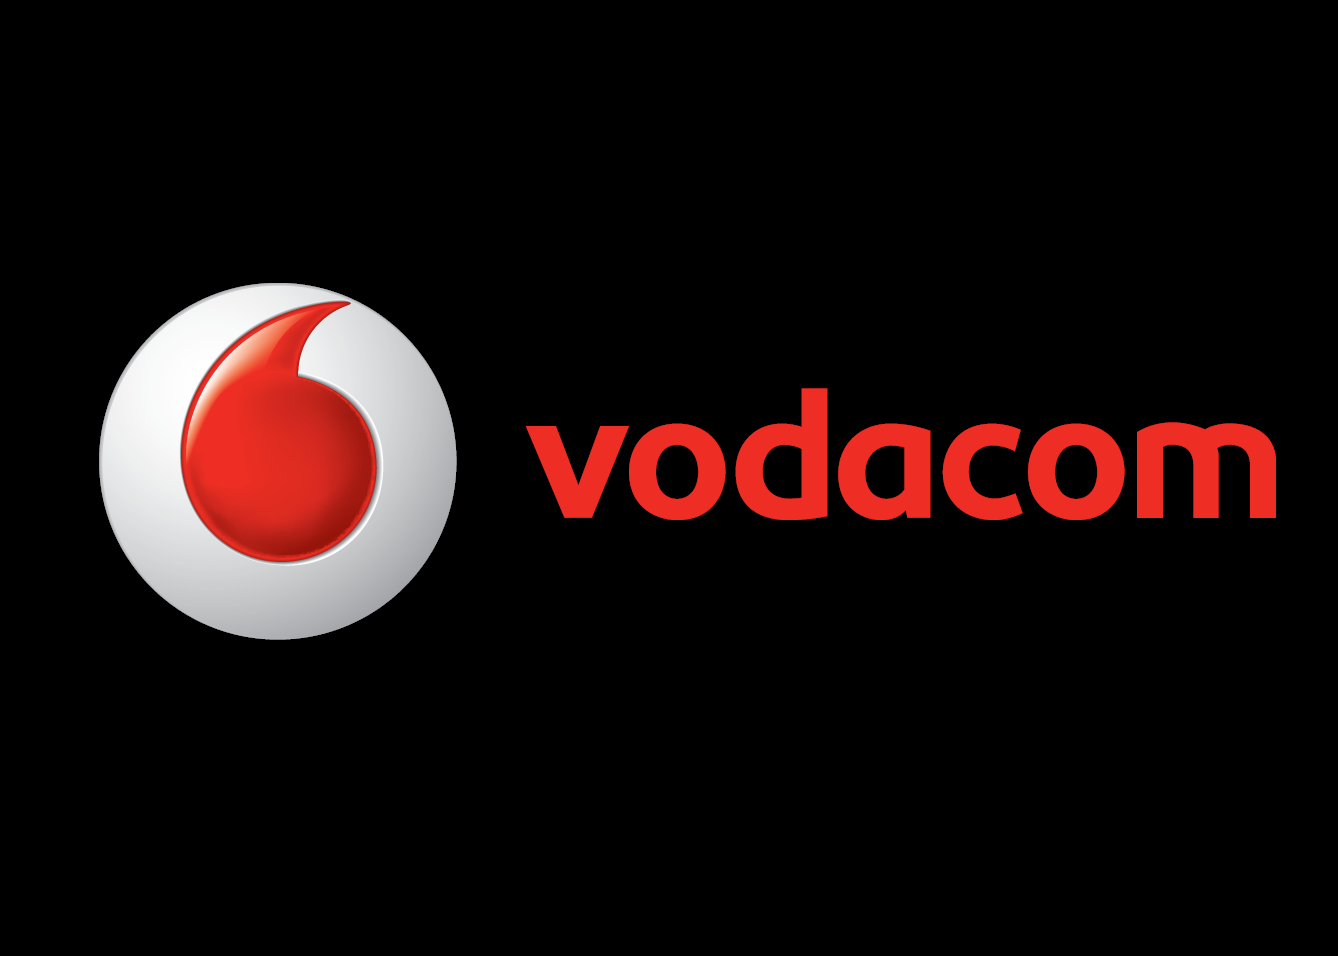 Vodacom collaborates with Alipay to build a New Super-App